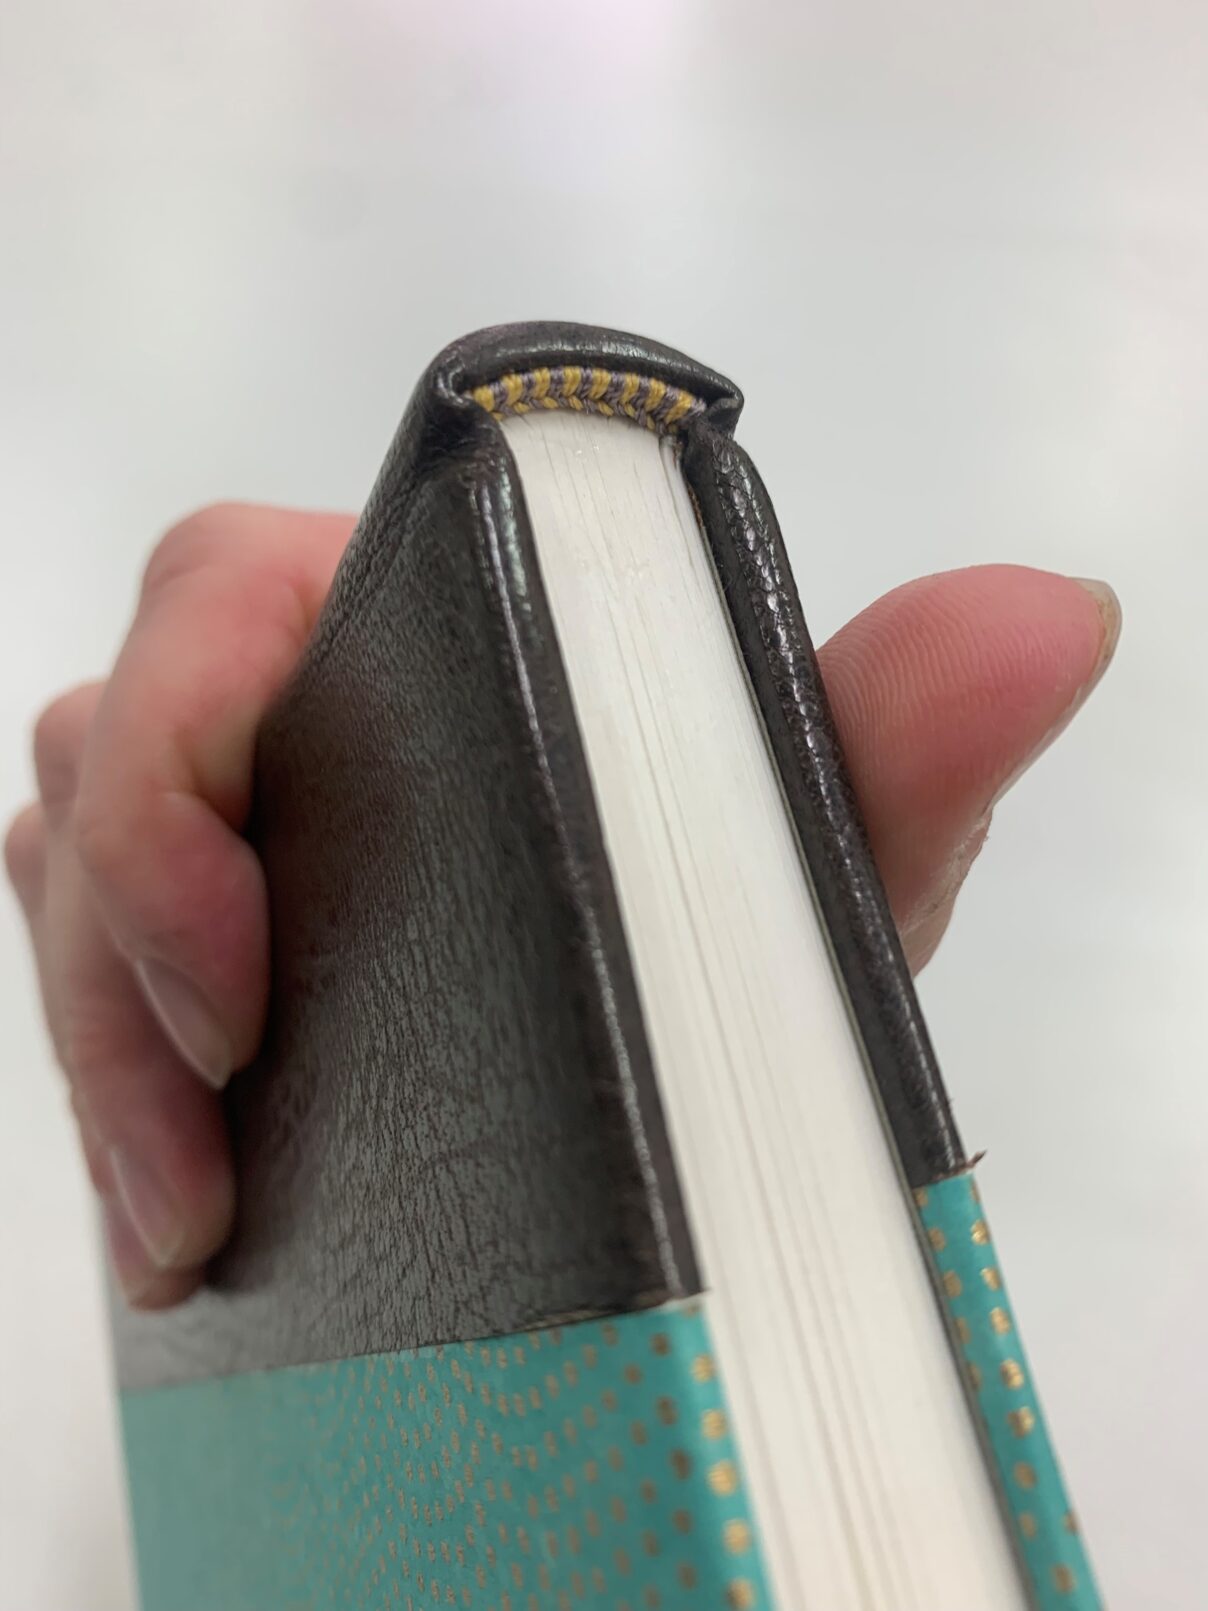 A hand holds a newly bound book for close inspection, focusing on the endband and endcap. The endband is gold and silver thread over a single core with a front bead; the end cap is lightly rounded with crisp folds. The book is bound in half leather with gold-dotted green paper.